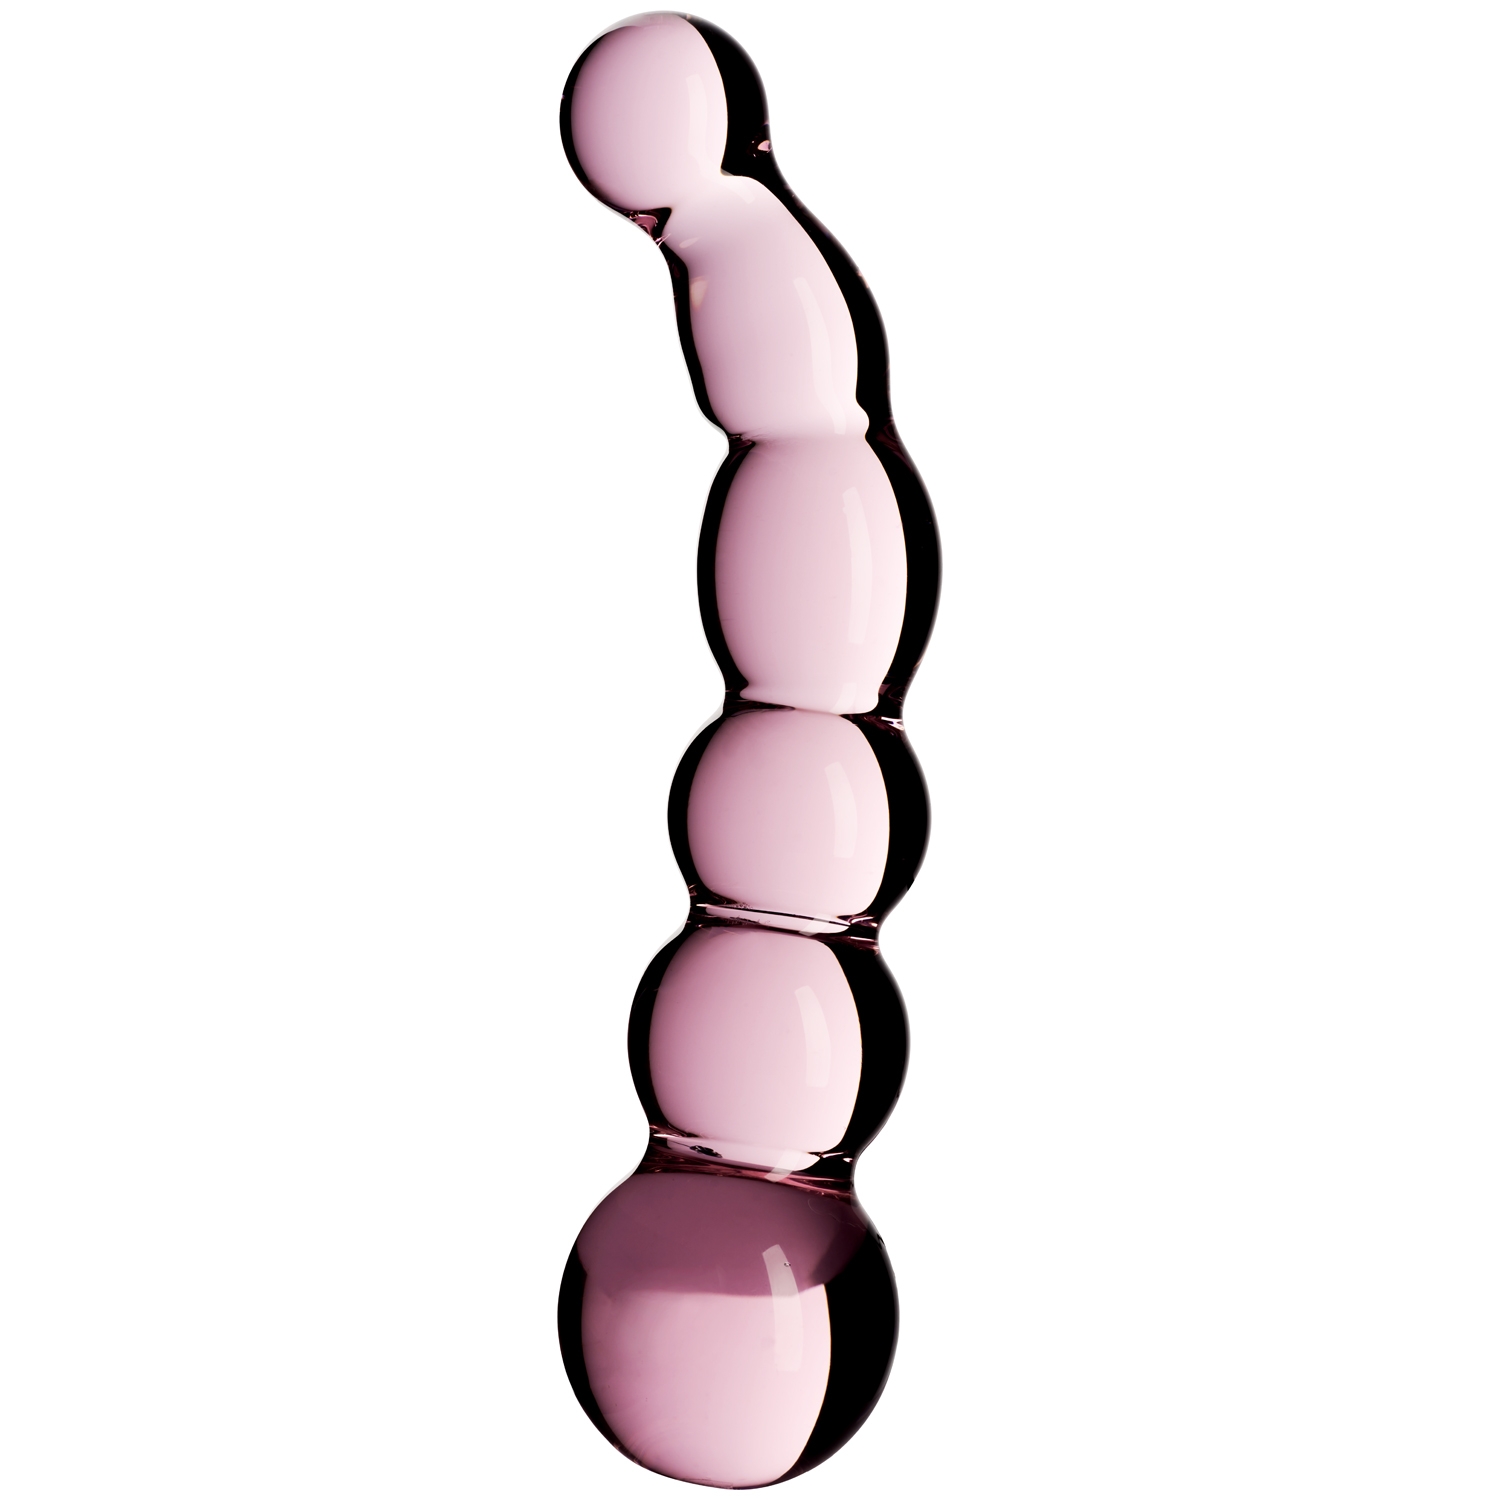 Sinful Rose Groove Glas Dildo 17,5 cm - Pink thumbnail